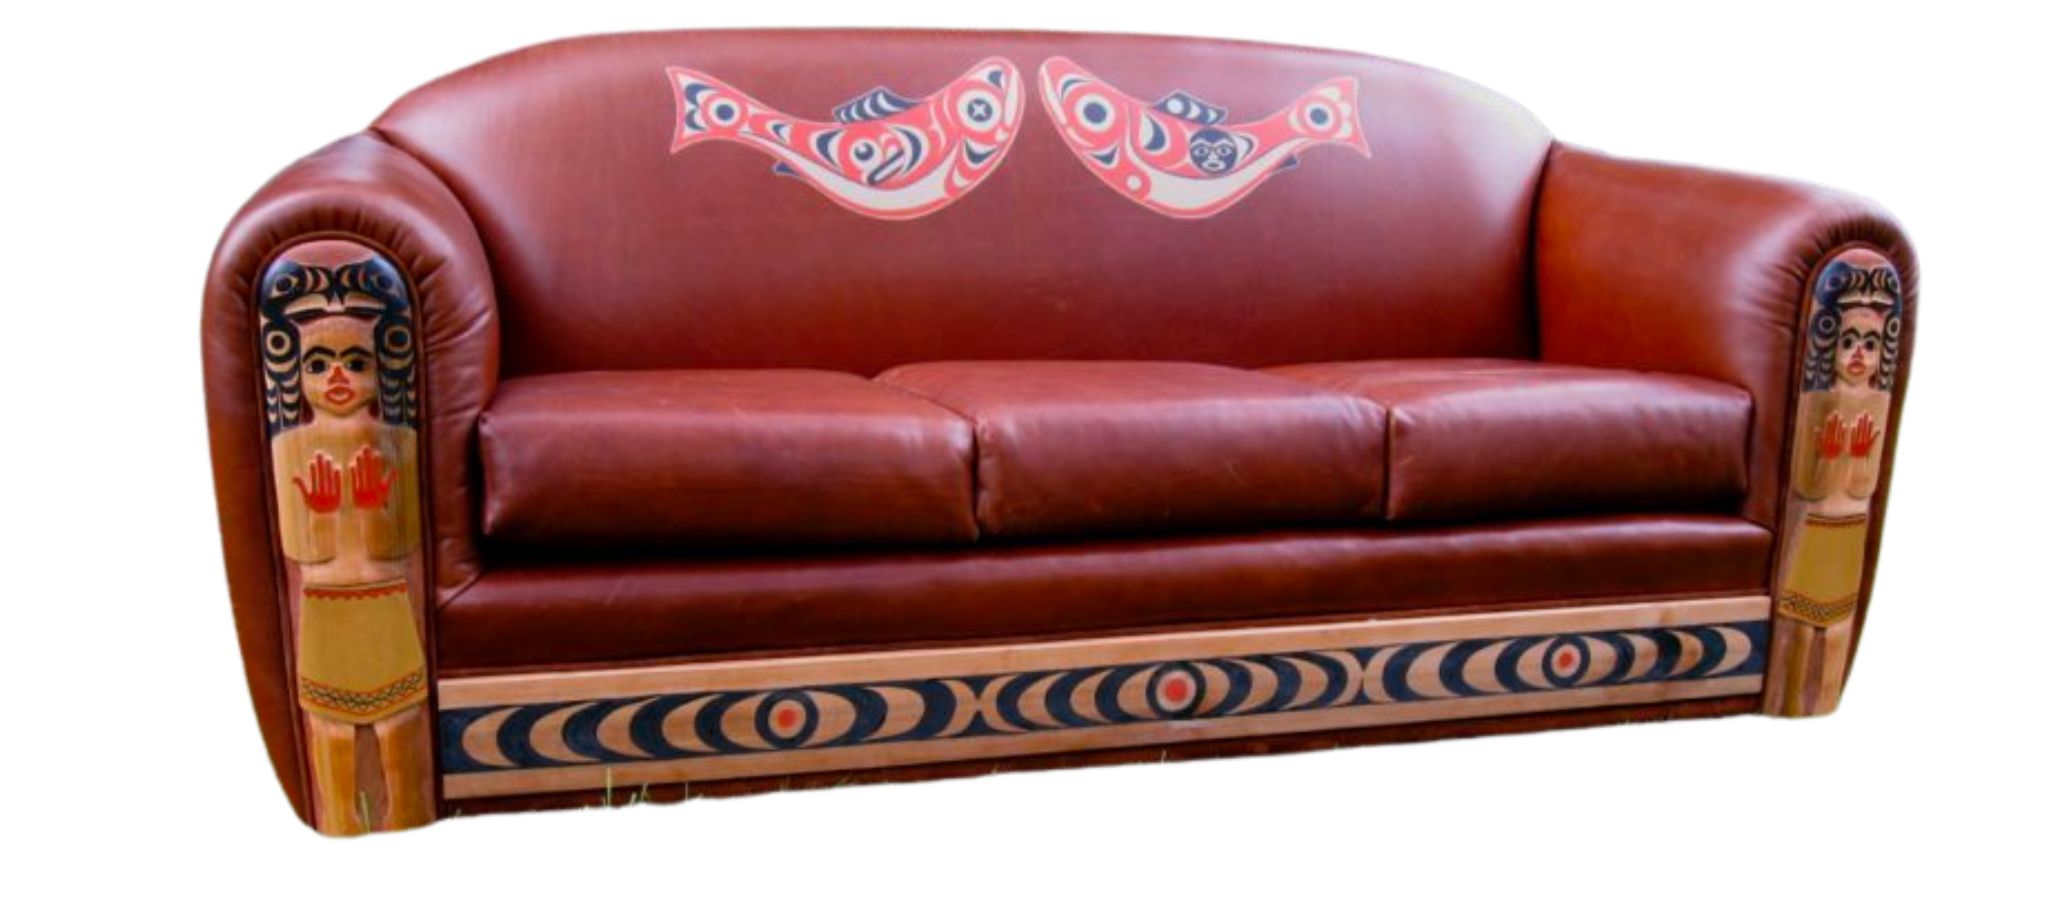 Leather sofa with northwest coastal tribal art painting and carving